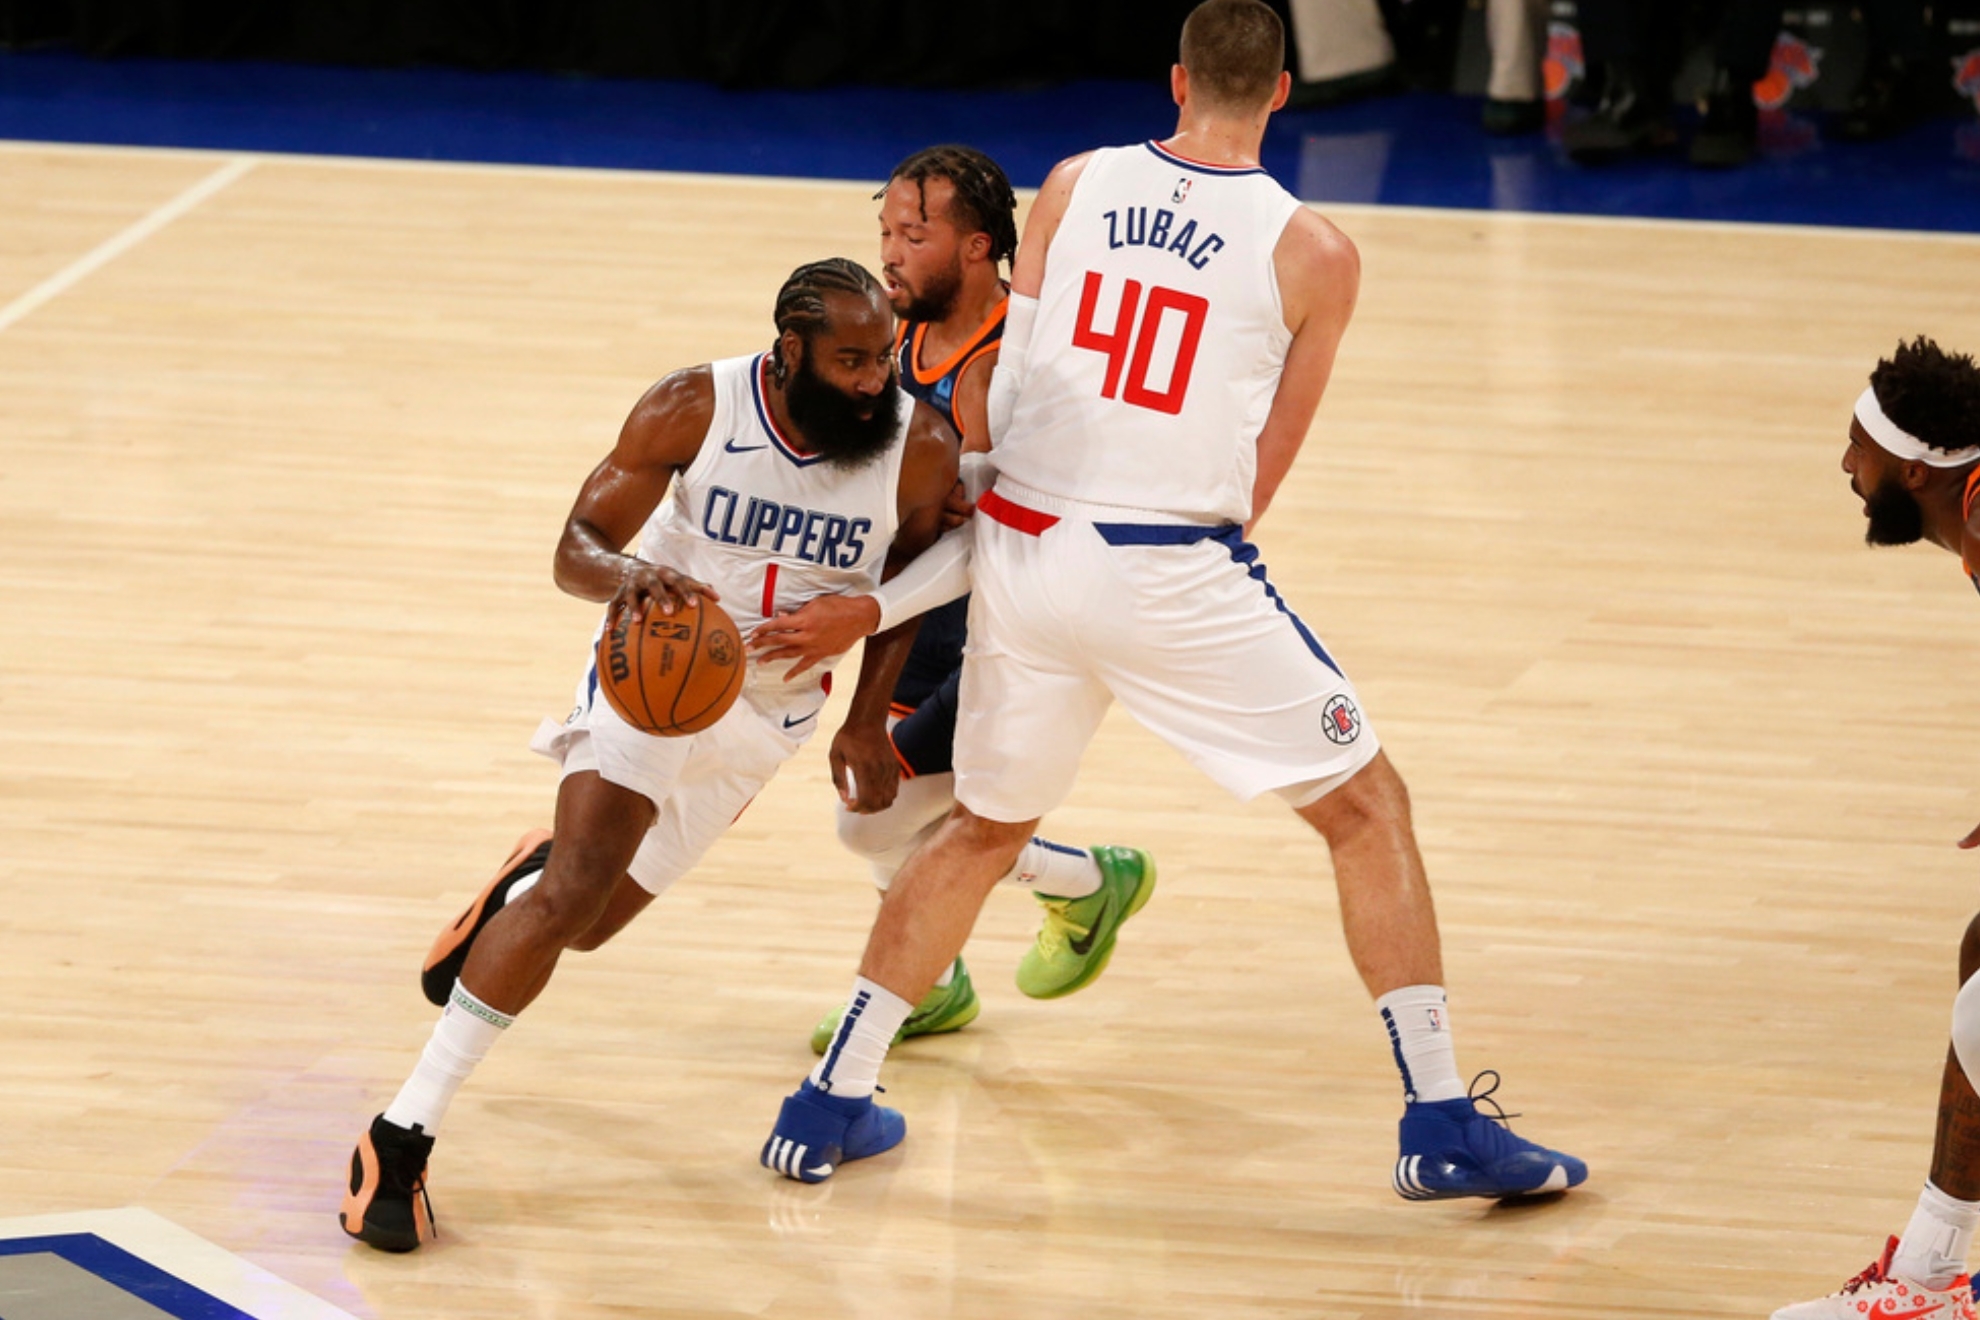 Los Angeles Clippers guard James Harden dribbles around teammate Ivica Zubac (40) and New York Knicks guard Jalen Brunson during the first half of an NBA basketball game